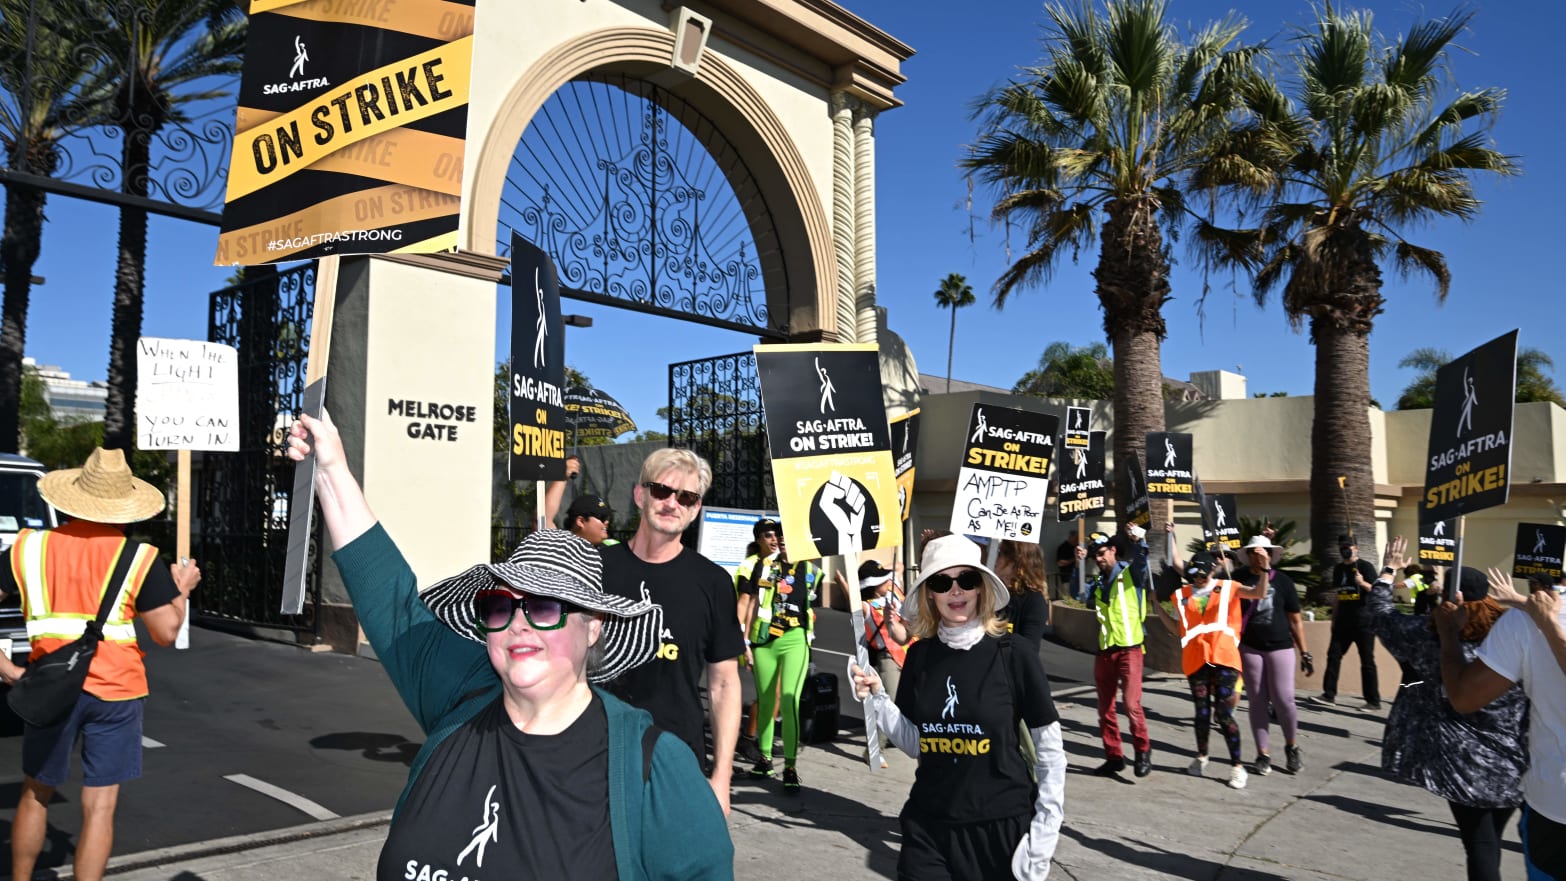 SAG-AFTRA members and supporters picket outside Paramount Studios